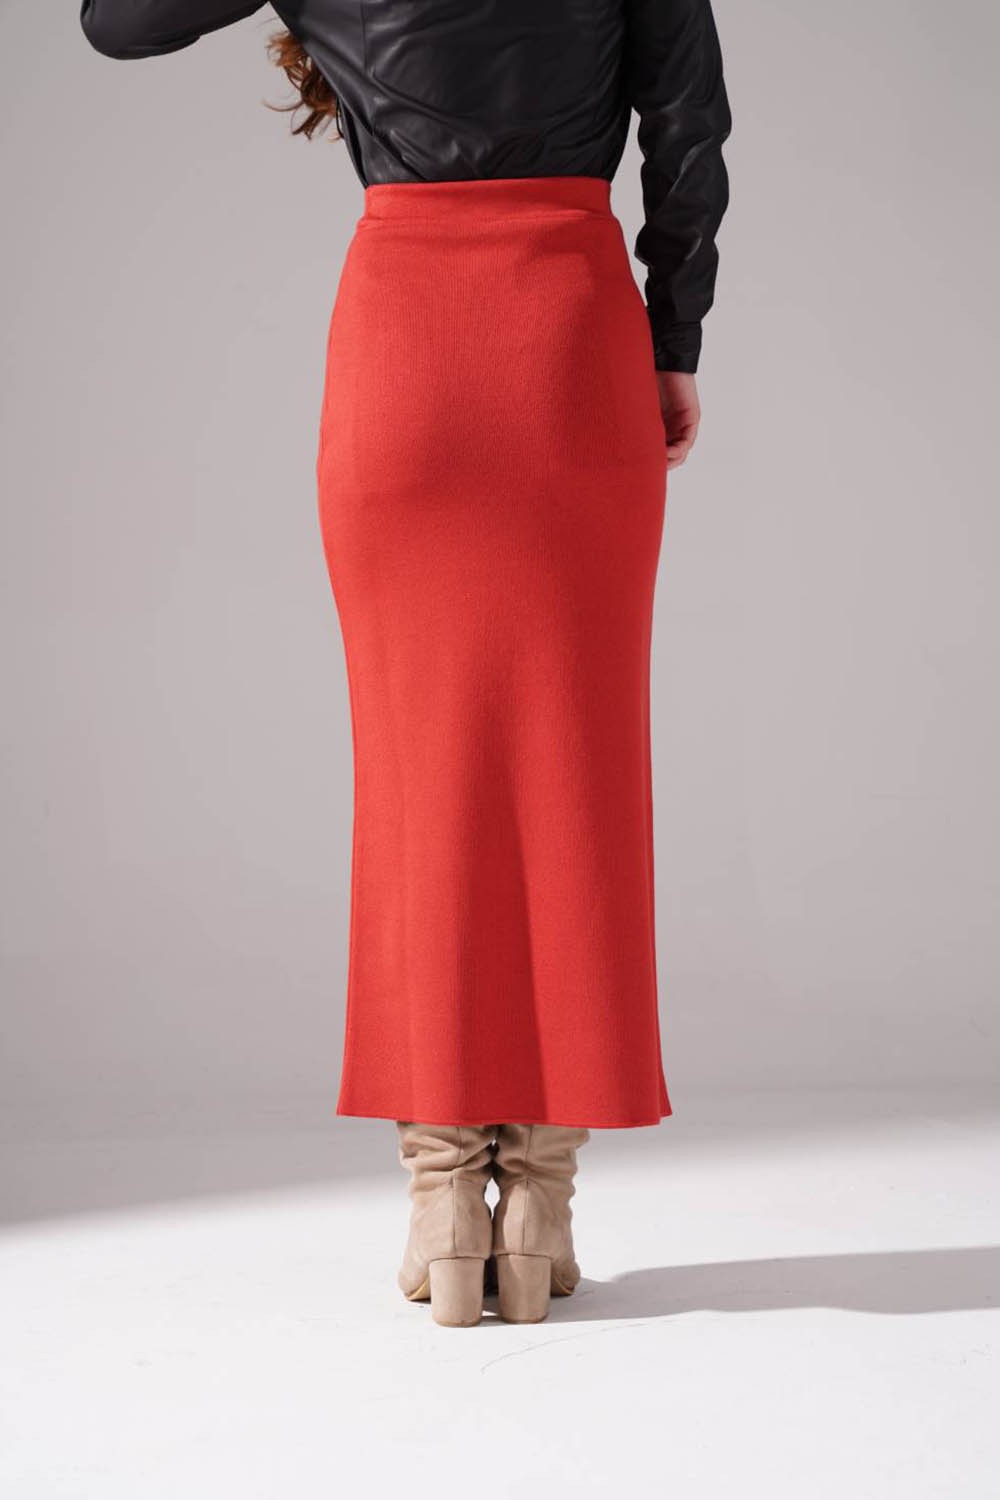 Silvery Knitted Knitwear Skirt (Brick Red)